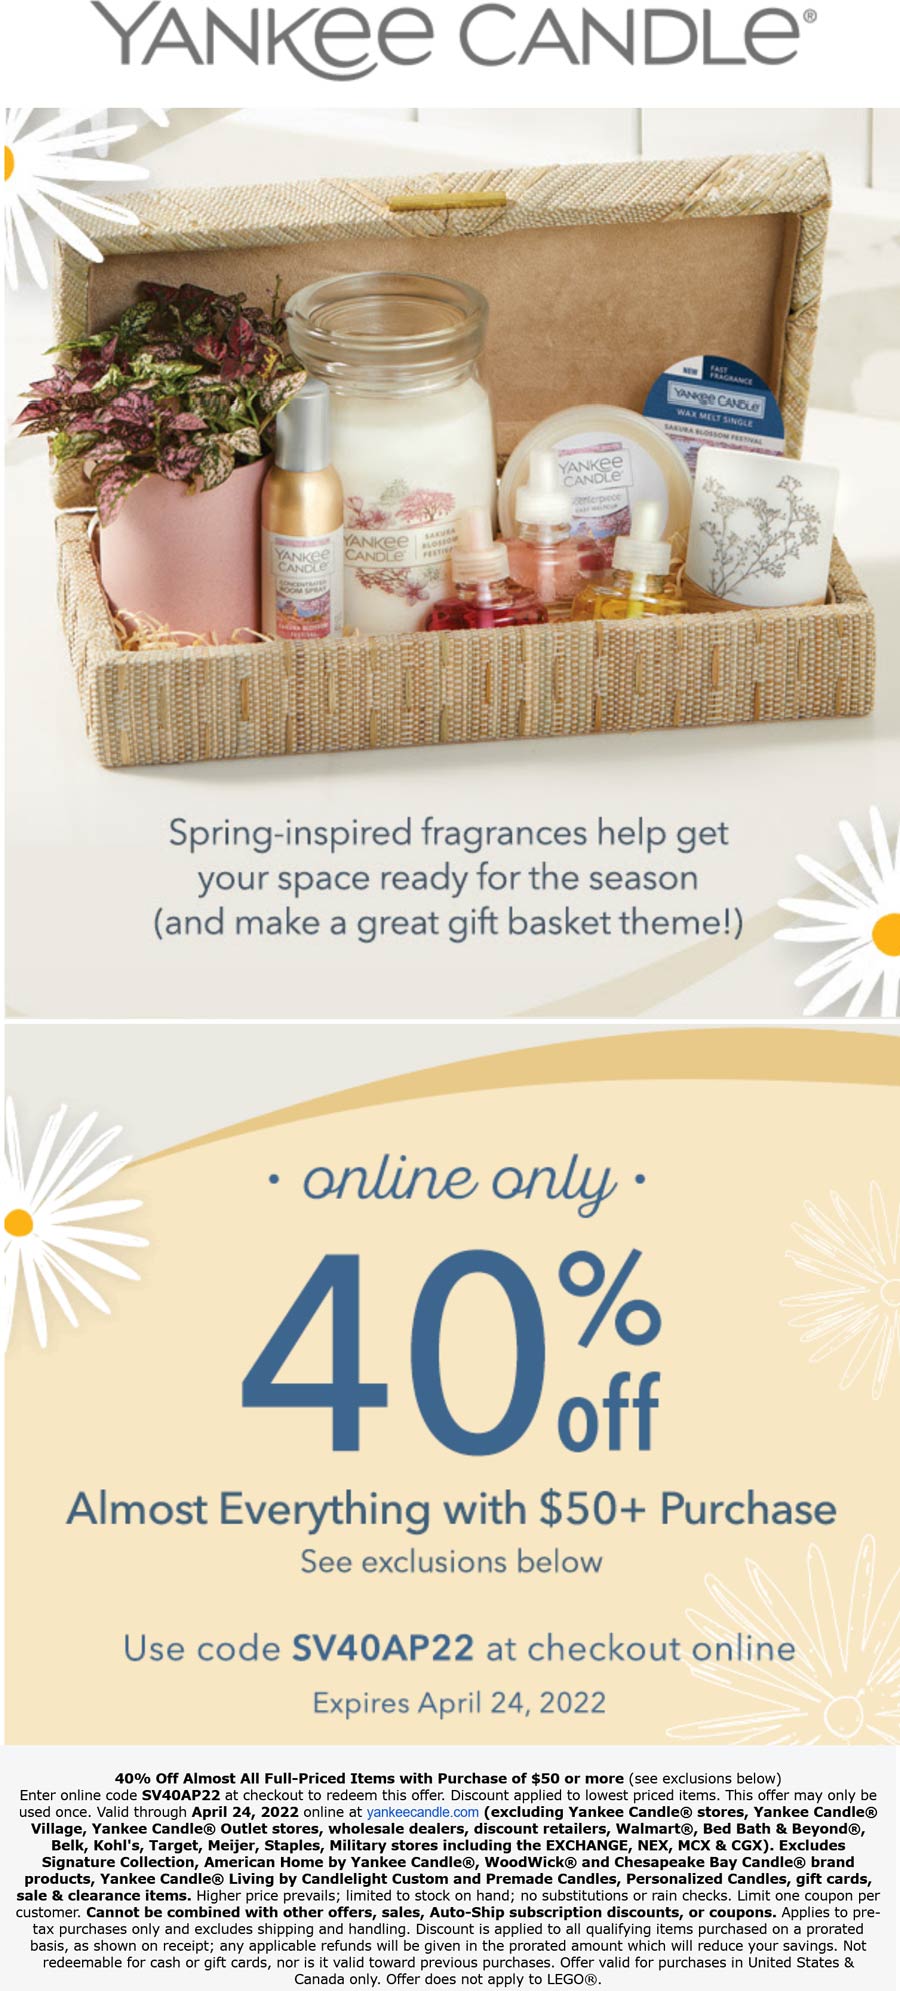 Yankee Candle stores Coupon  40% off $50+ online at Yankee Candle via promo code SV40AP22 #yankeecandle 